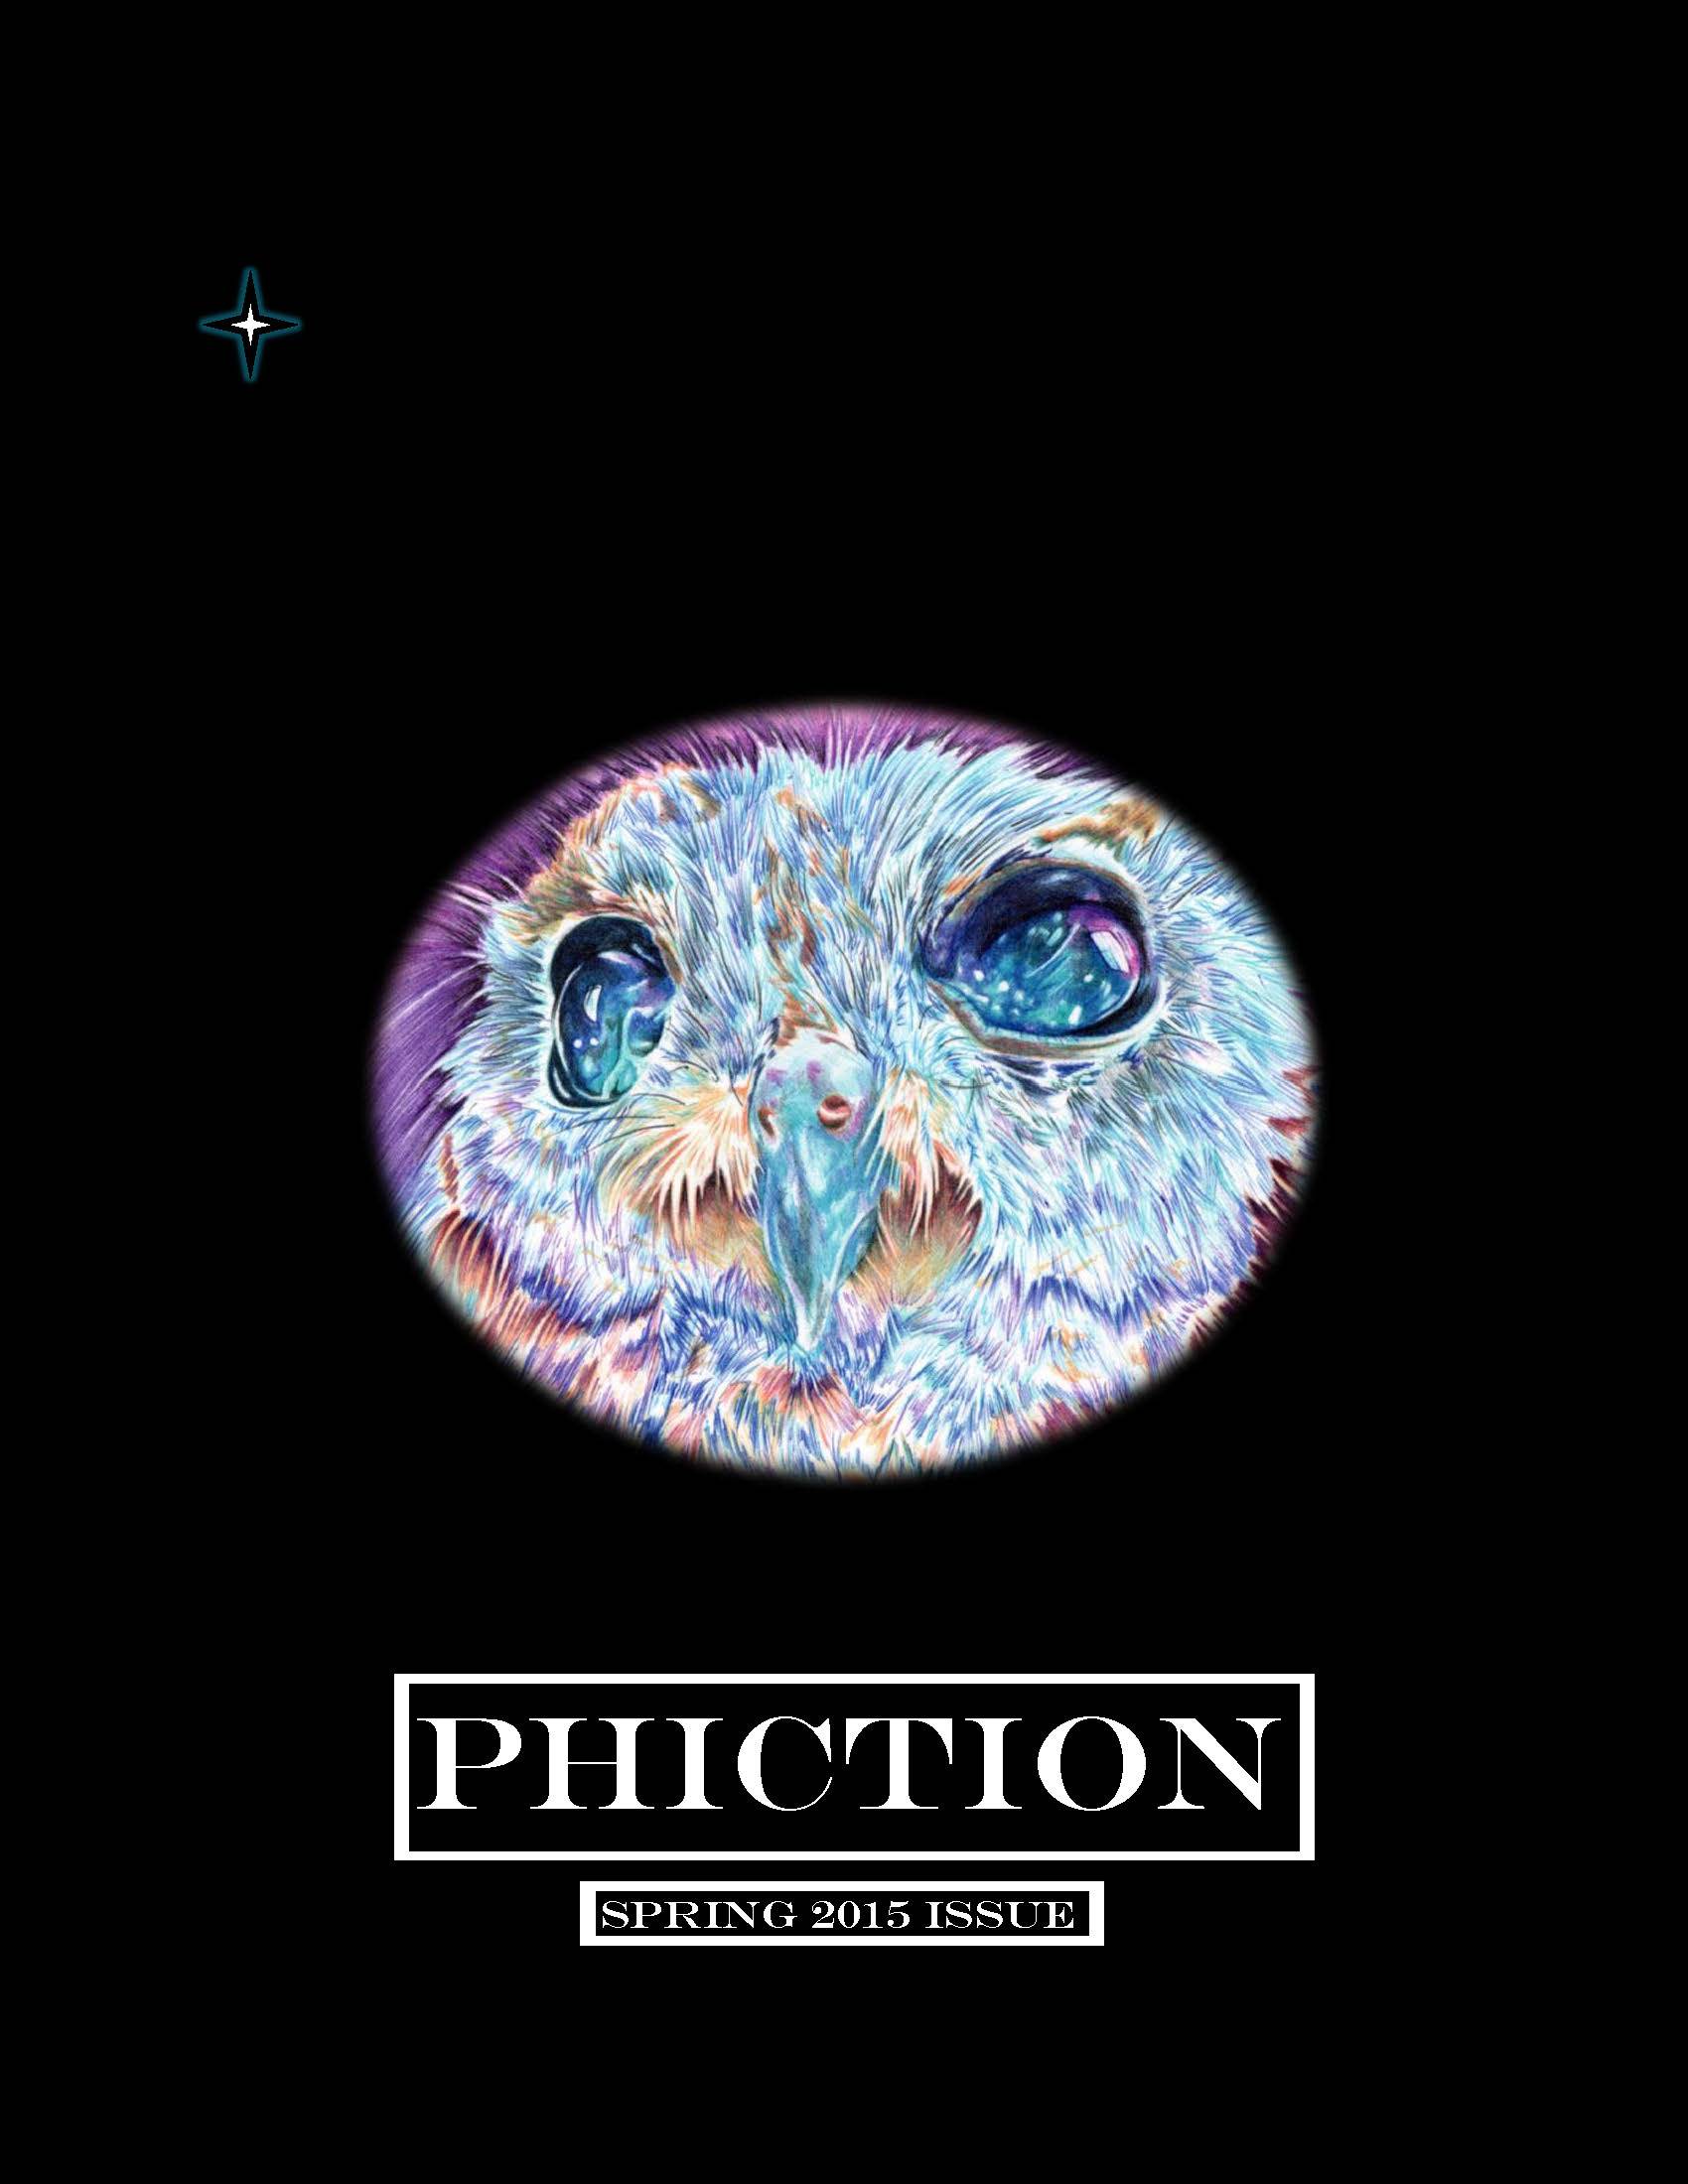 phiction 2015 cover